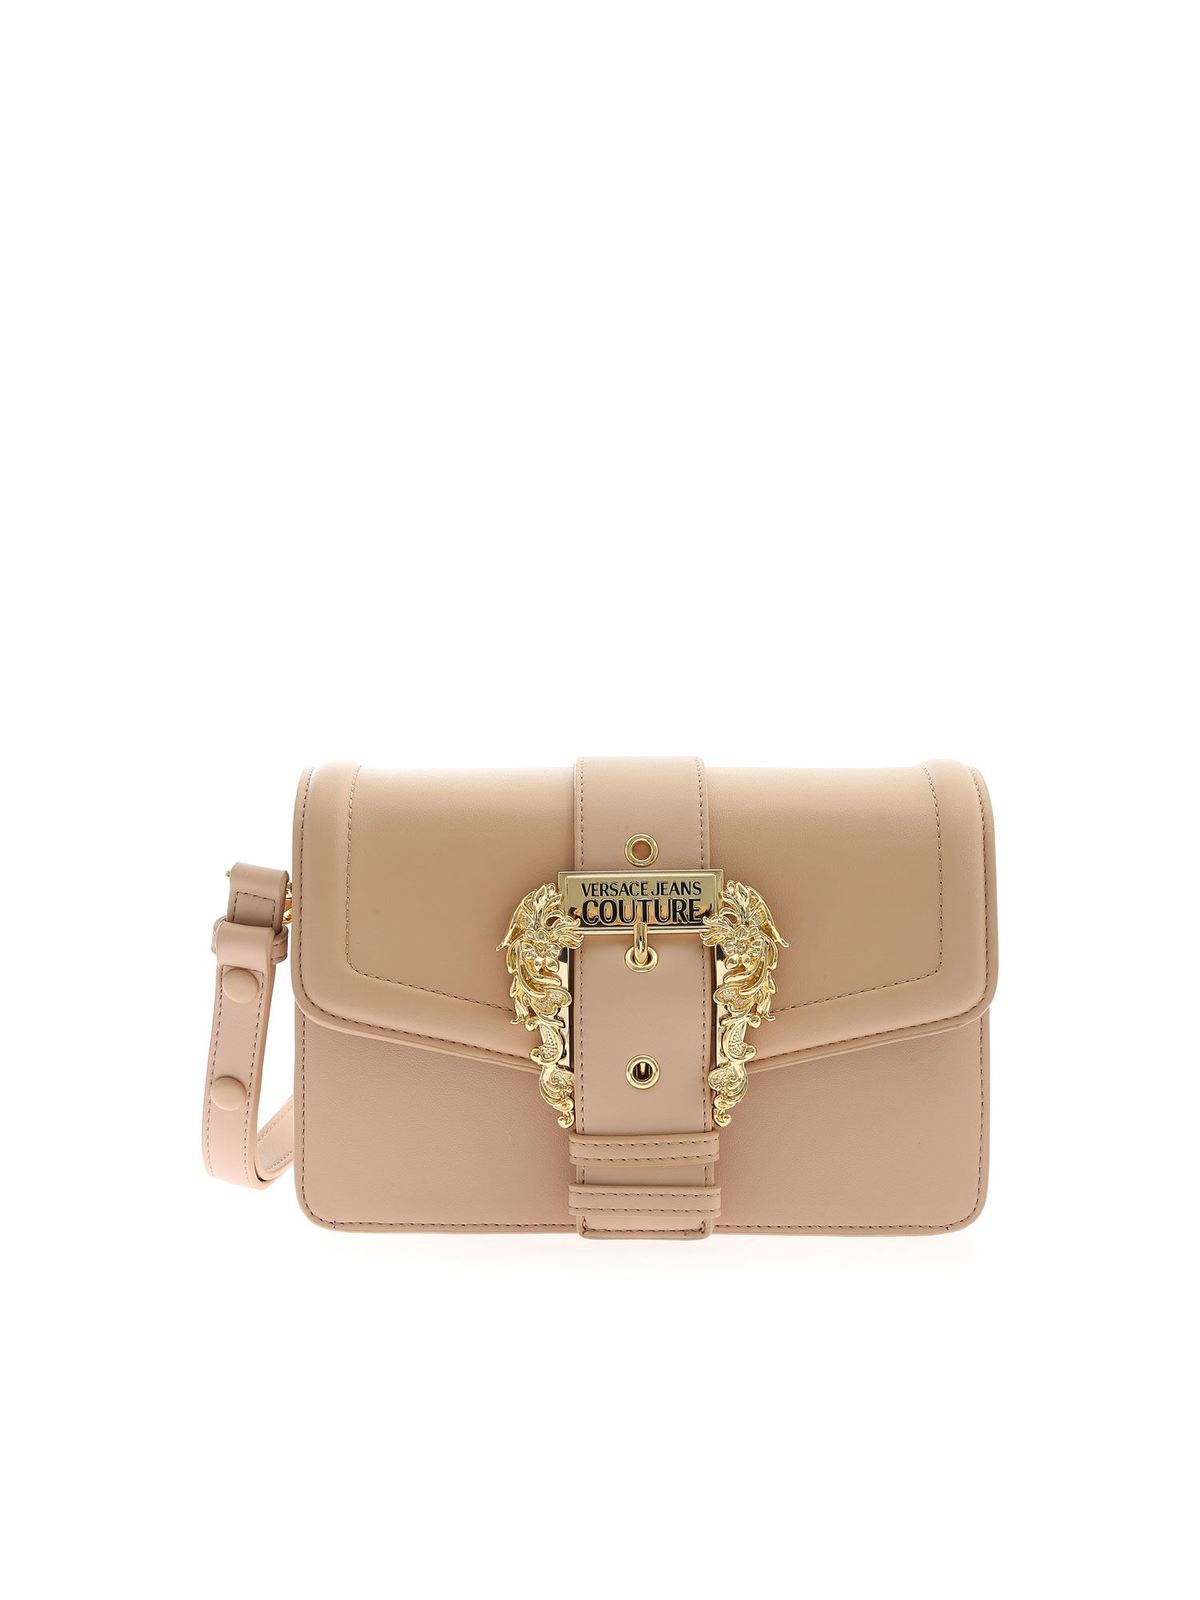 VERSACE JEANS COUTURE COUTURE I SHOULDER BAG IN PINK